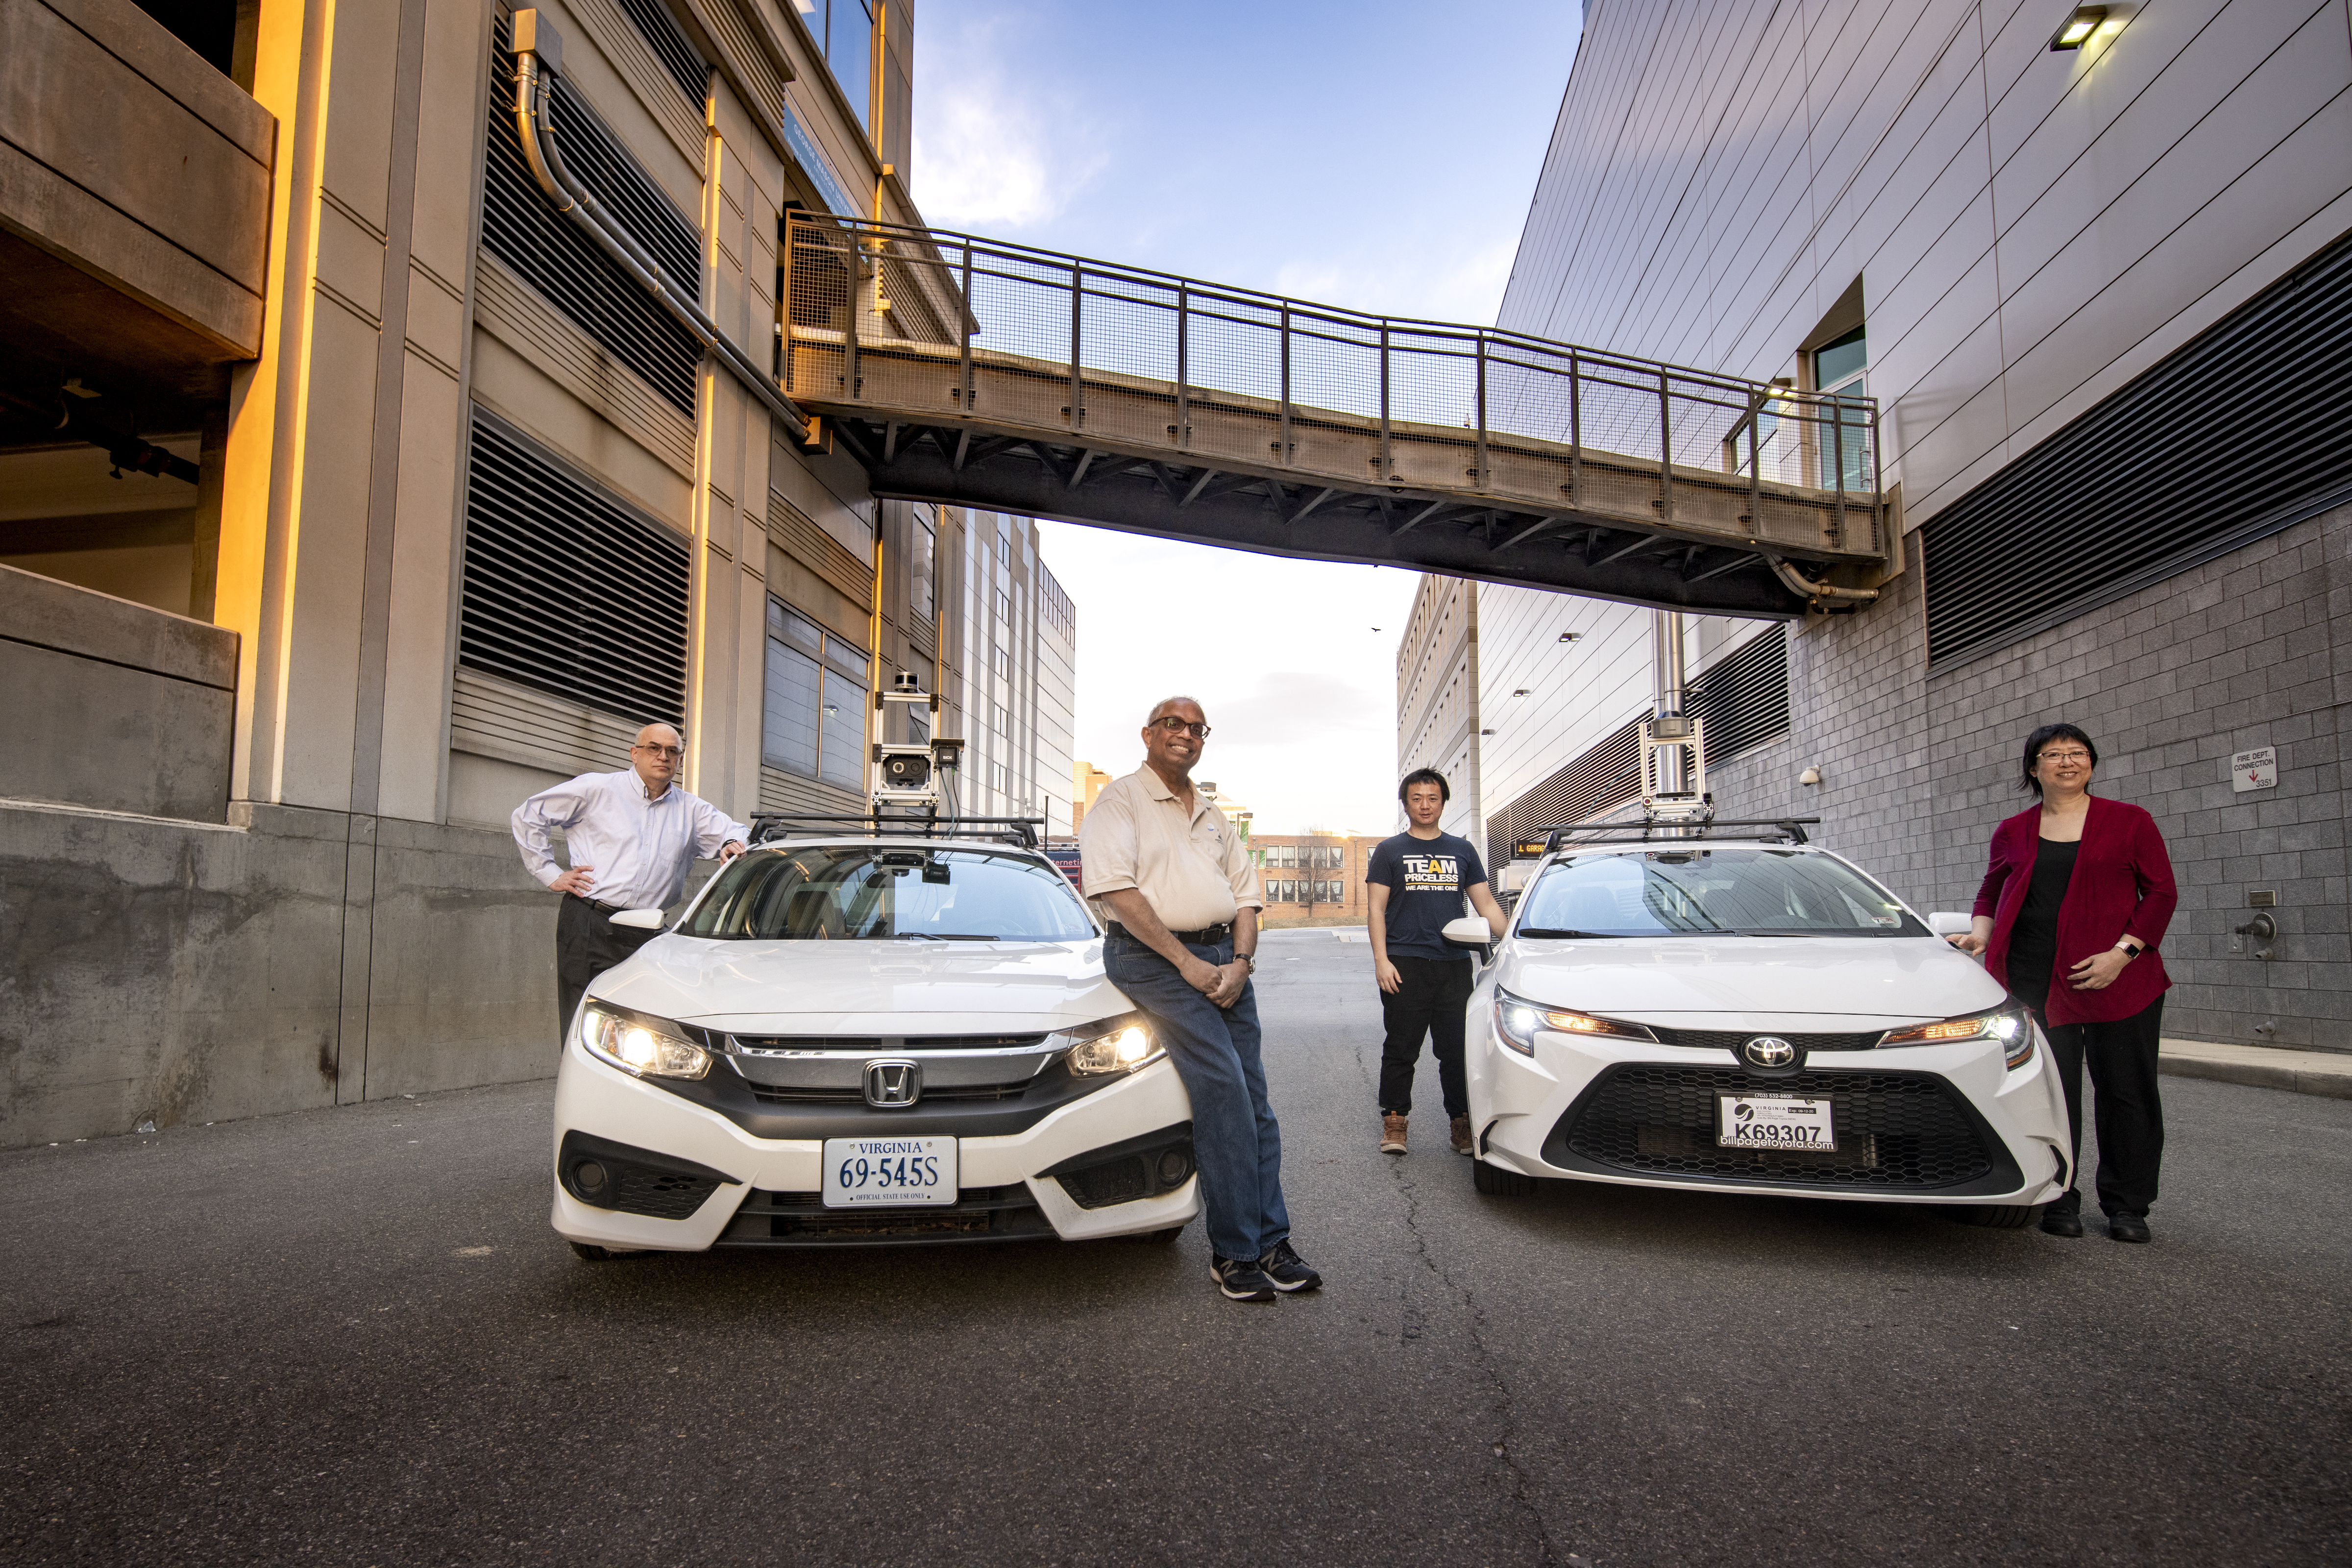 Students and faculty with autonomous car in Arlington